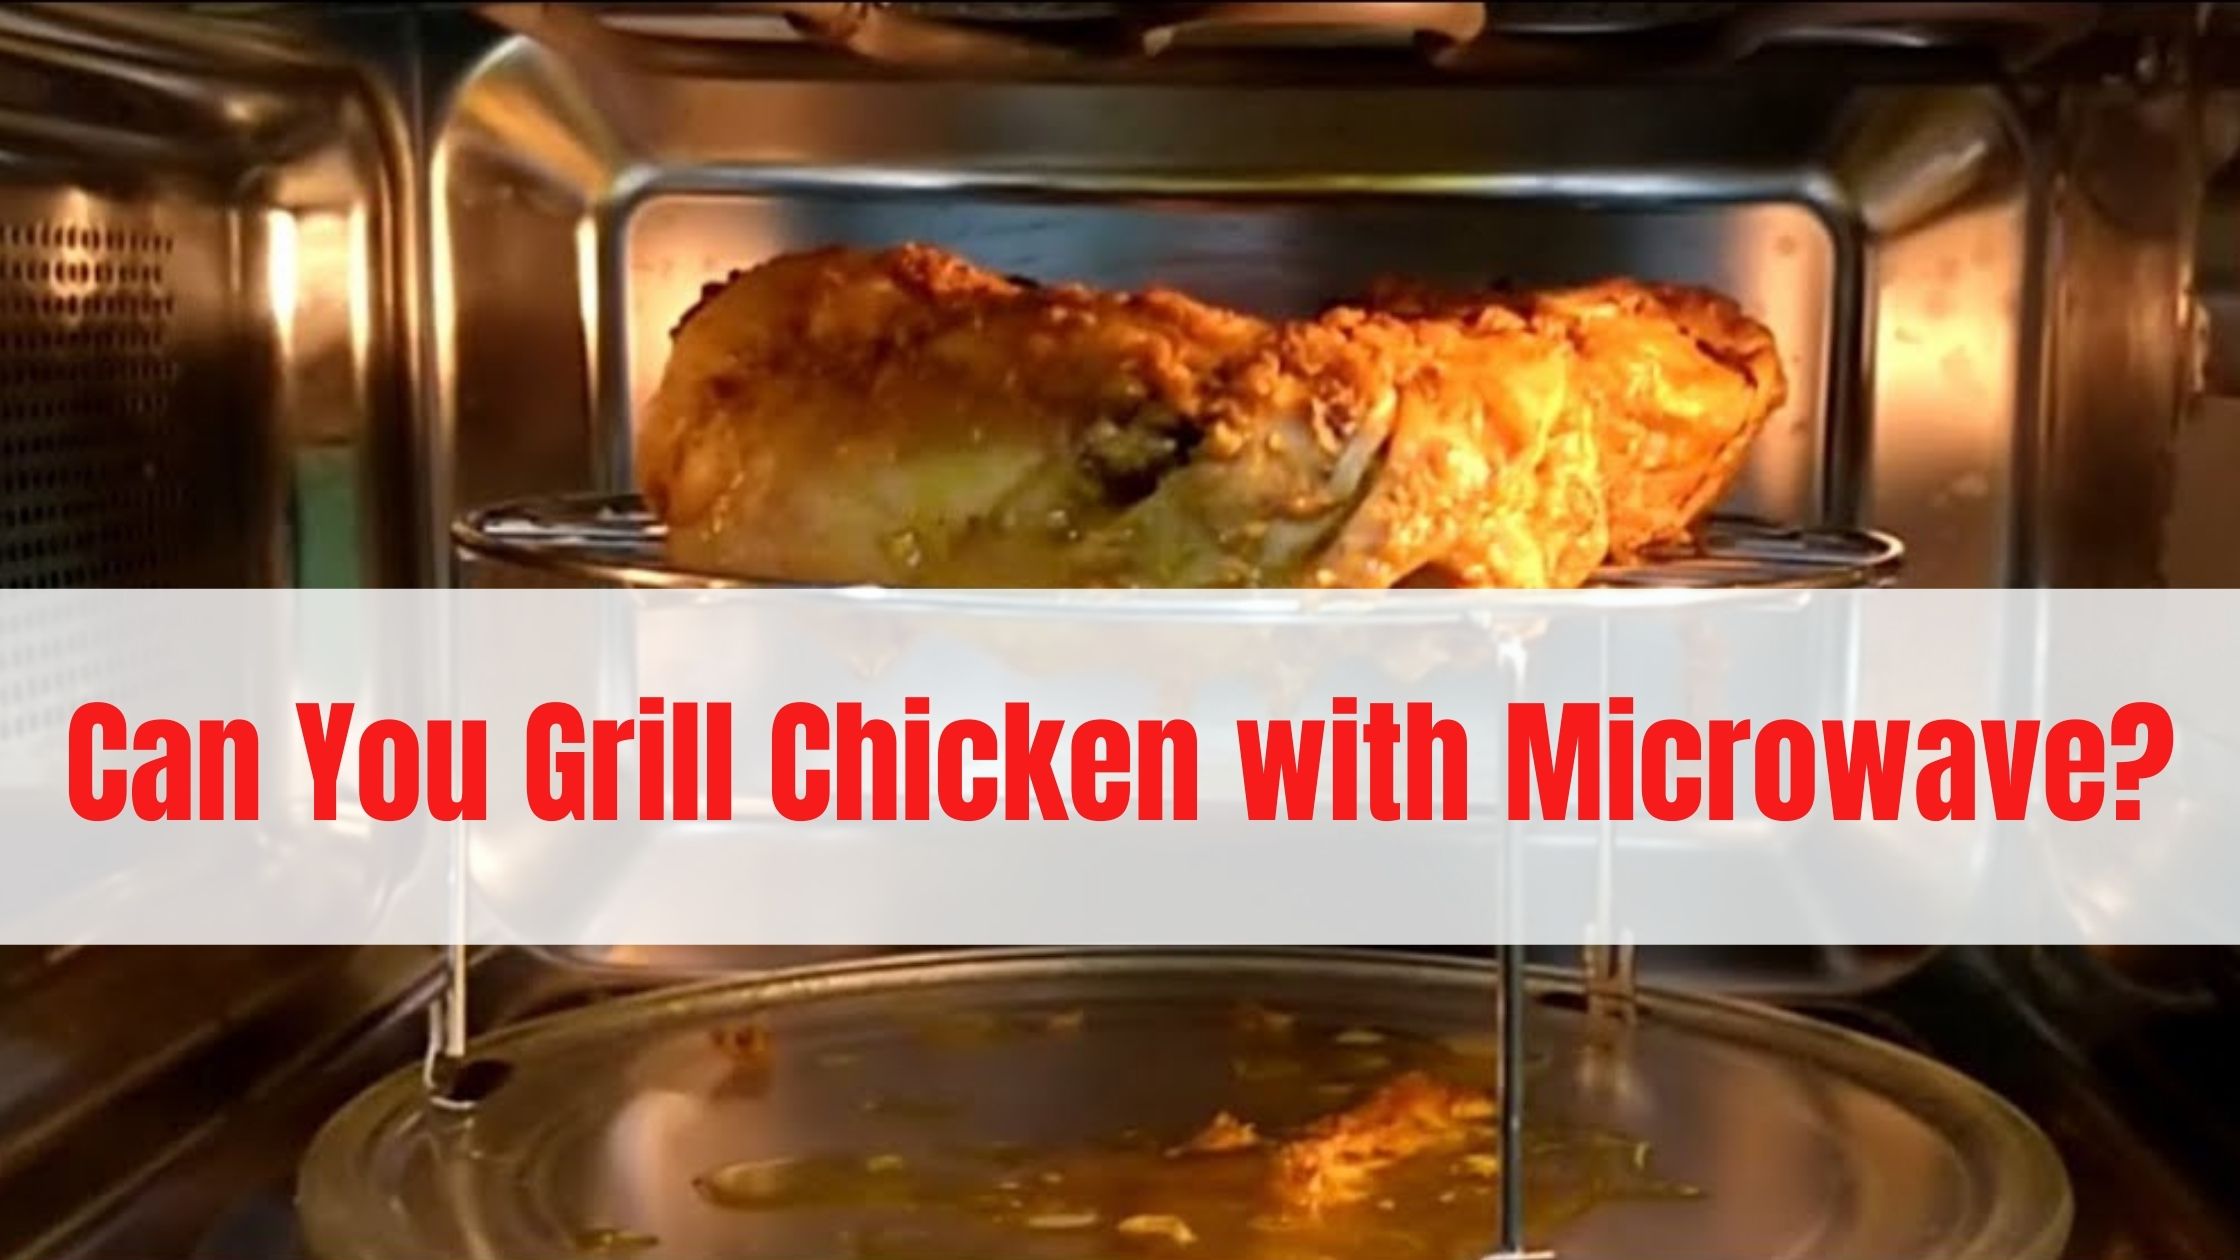 Can You Grill Chicken with Microwave